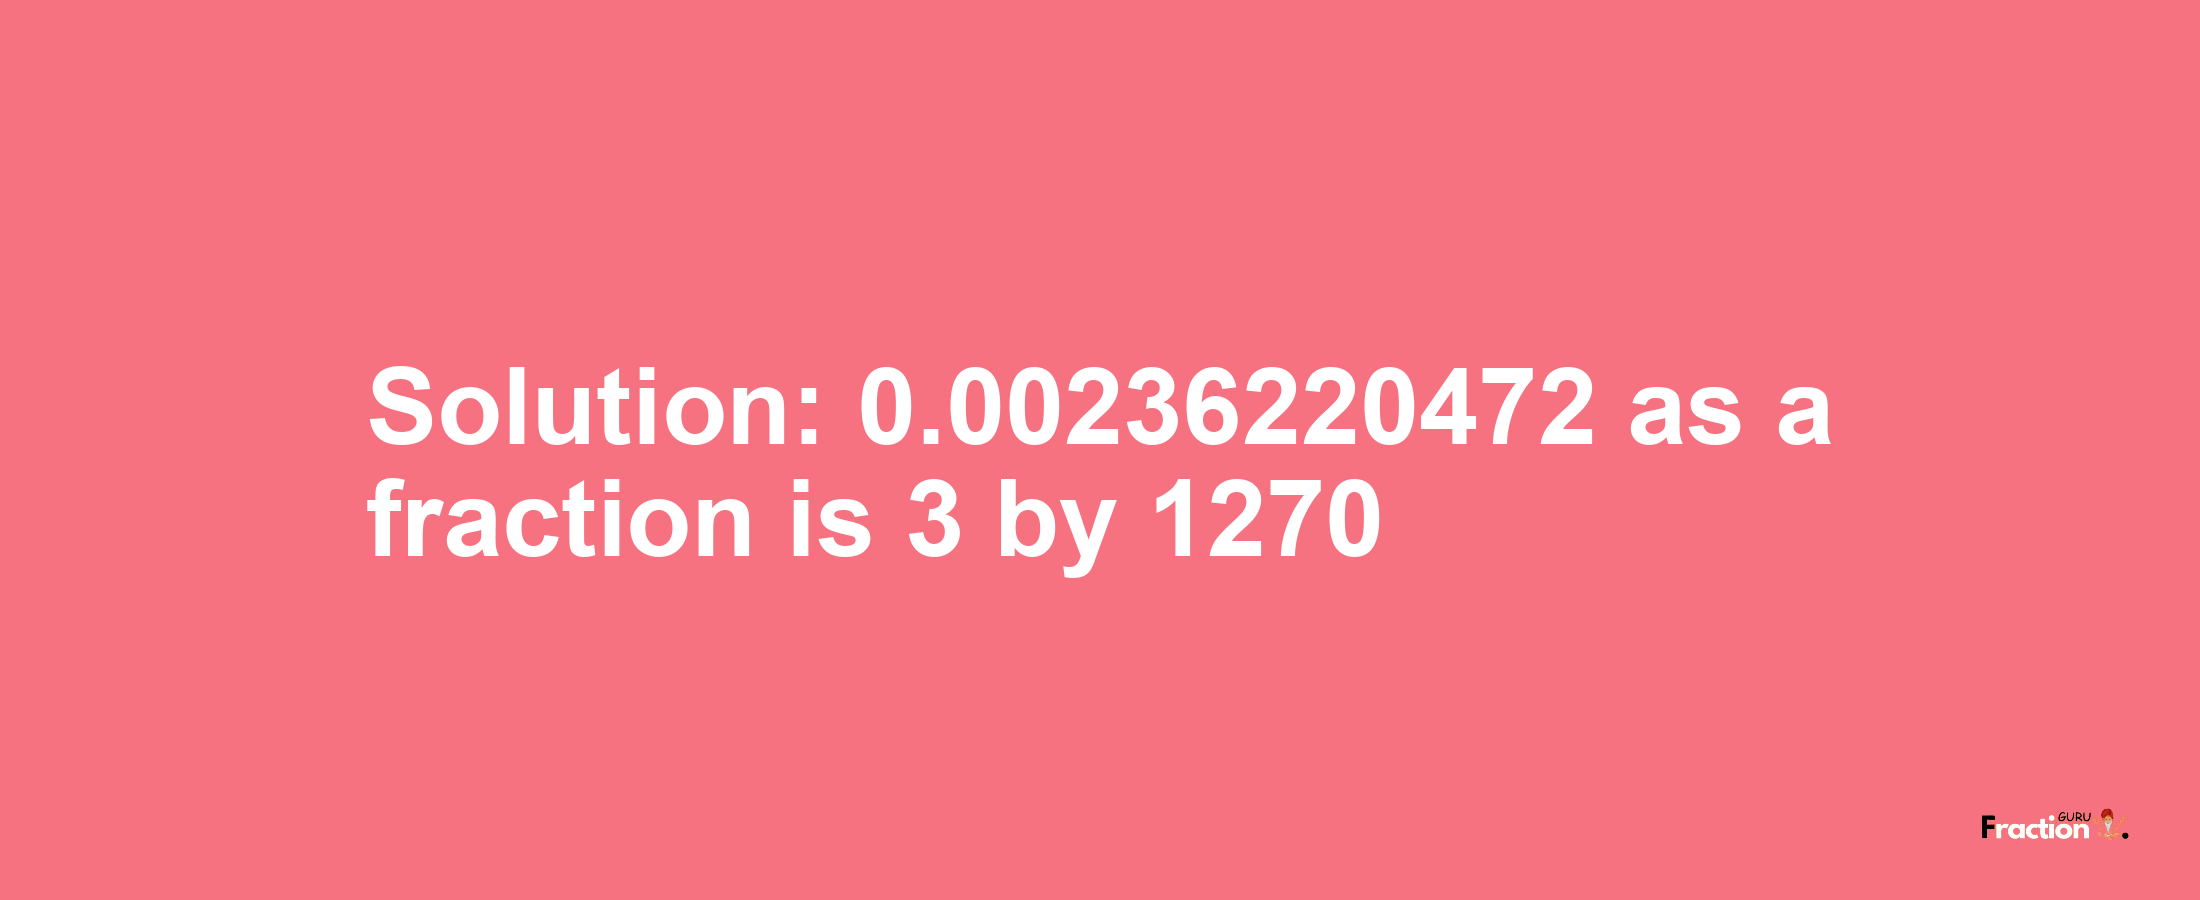 Solution:0.00236220472 as a fraction is 3/1270